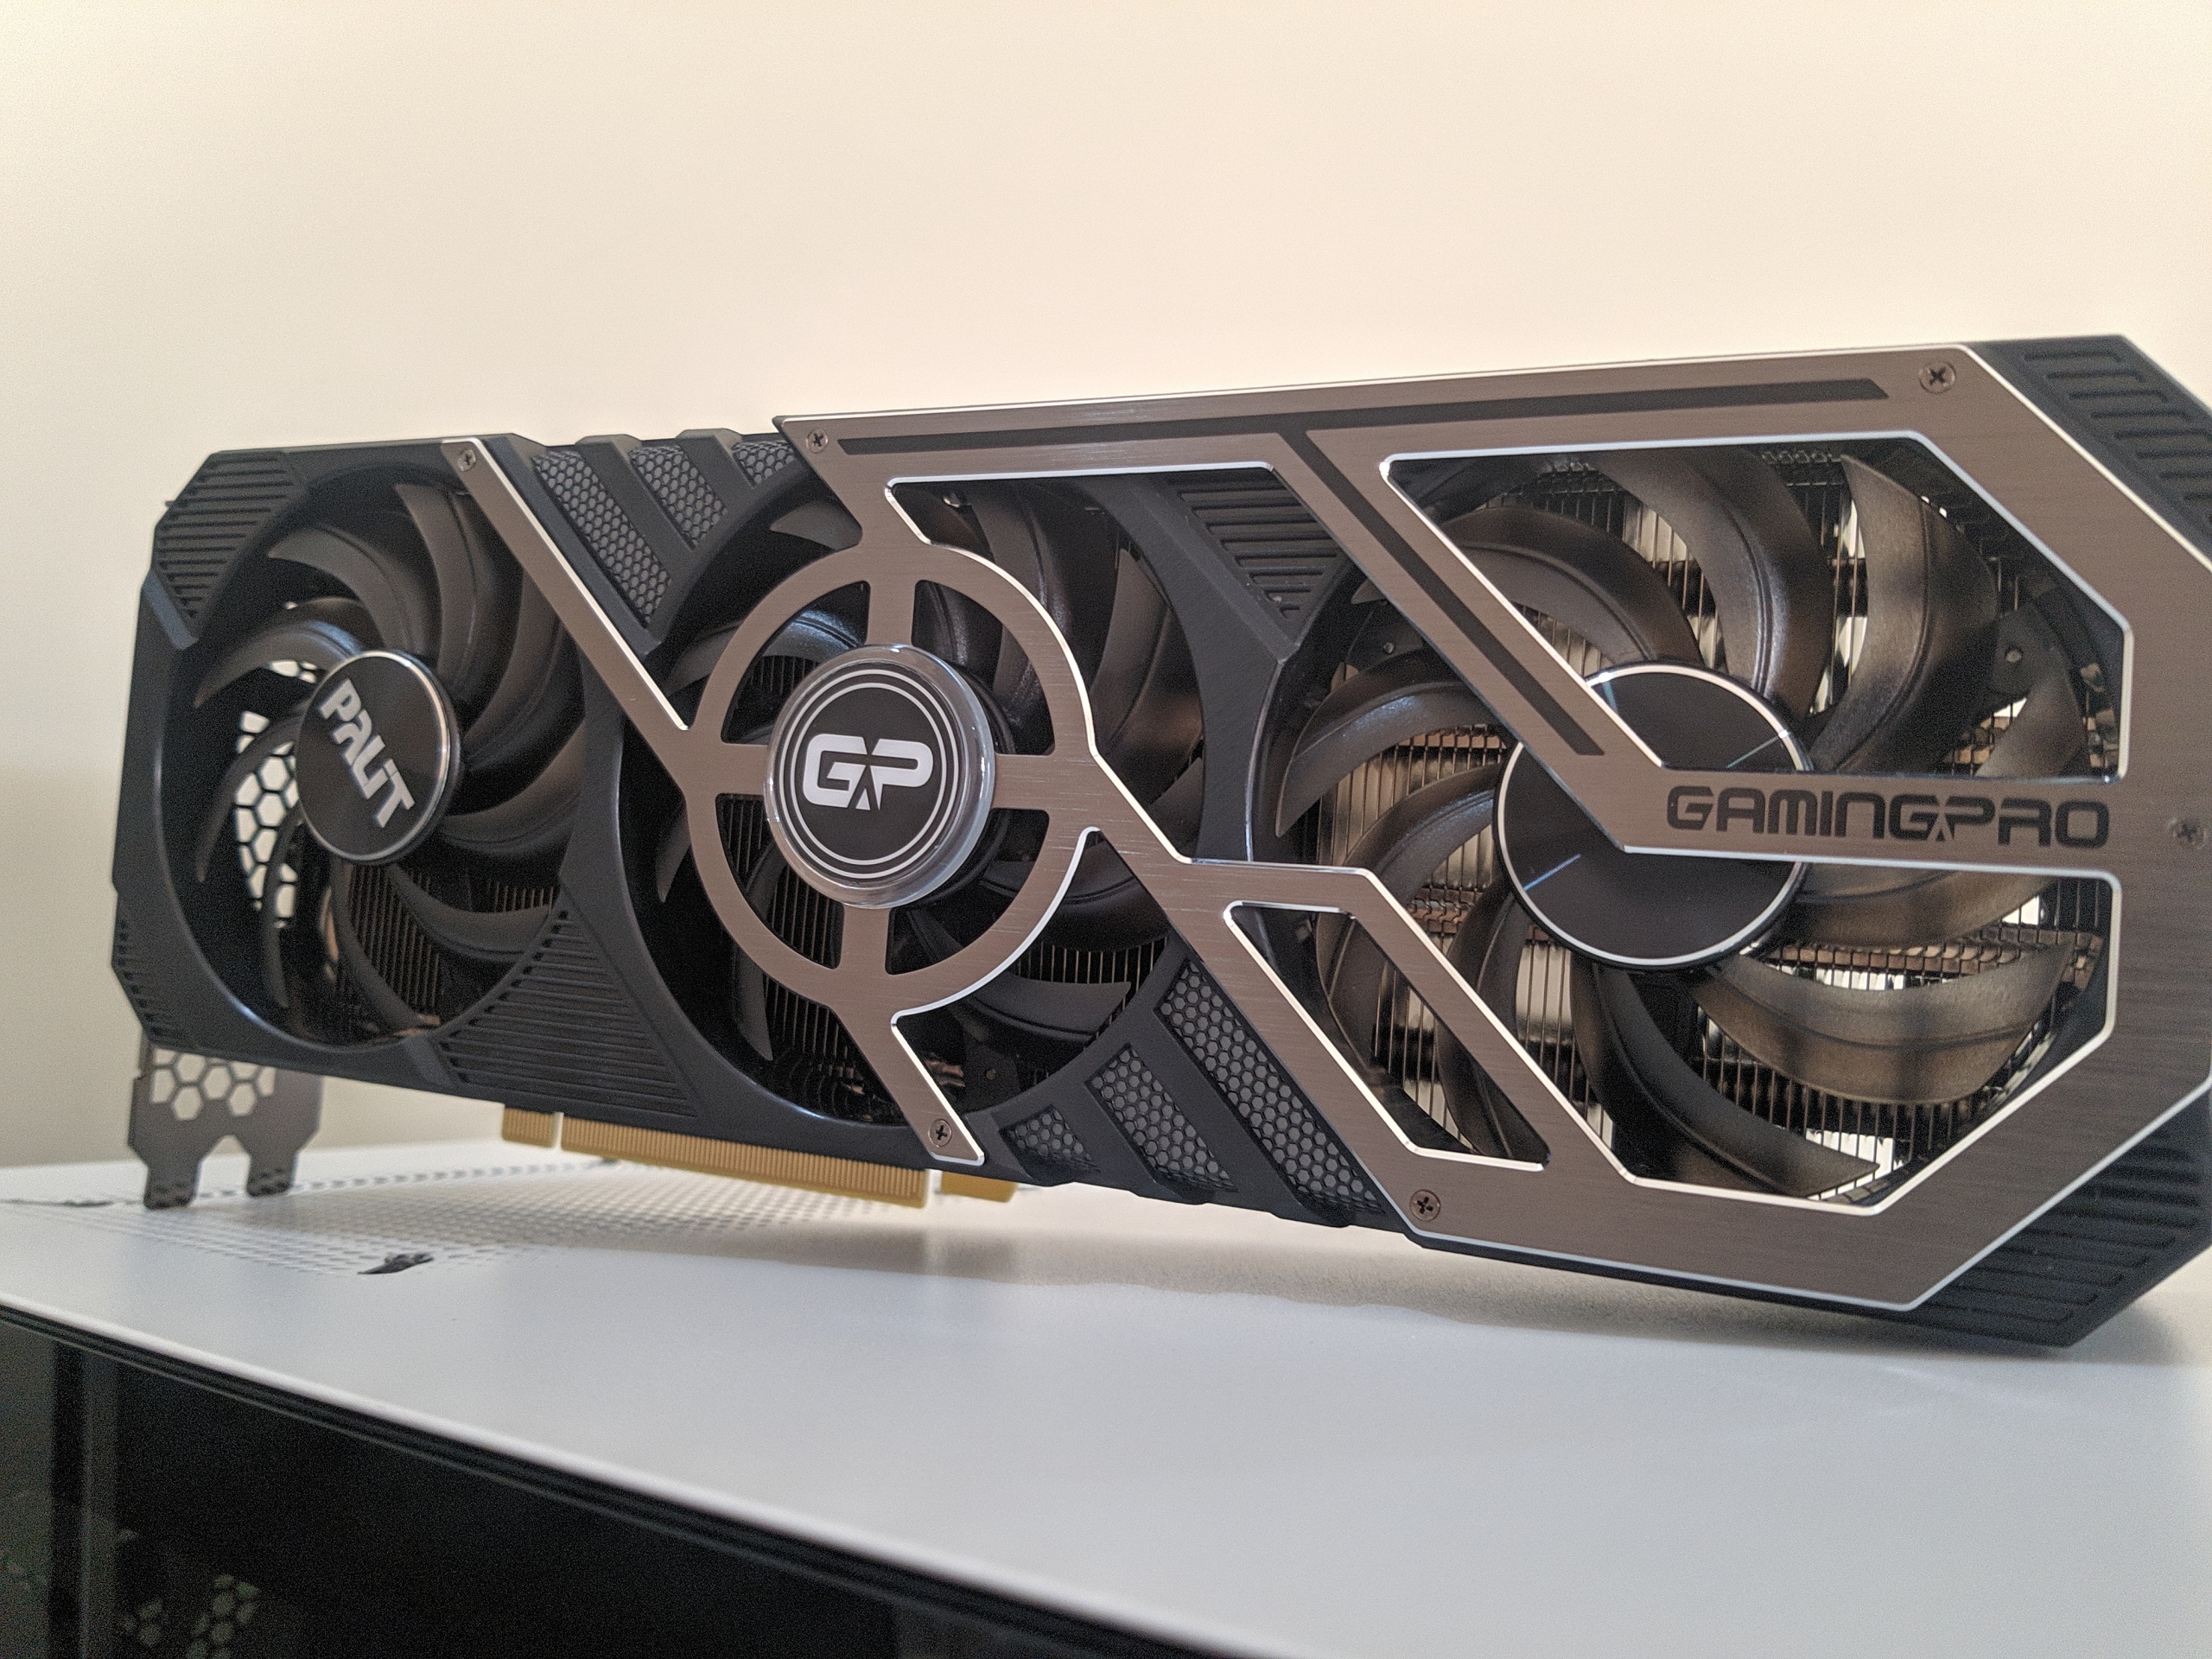 Palit Gaming Pro GeForce RTX 3070 Review - Appuals.com